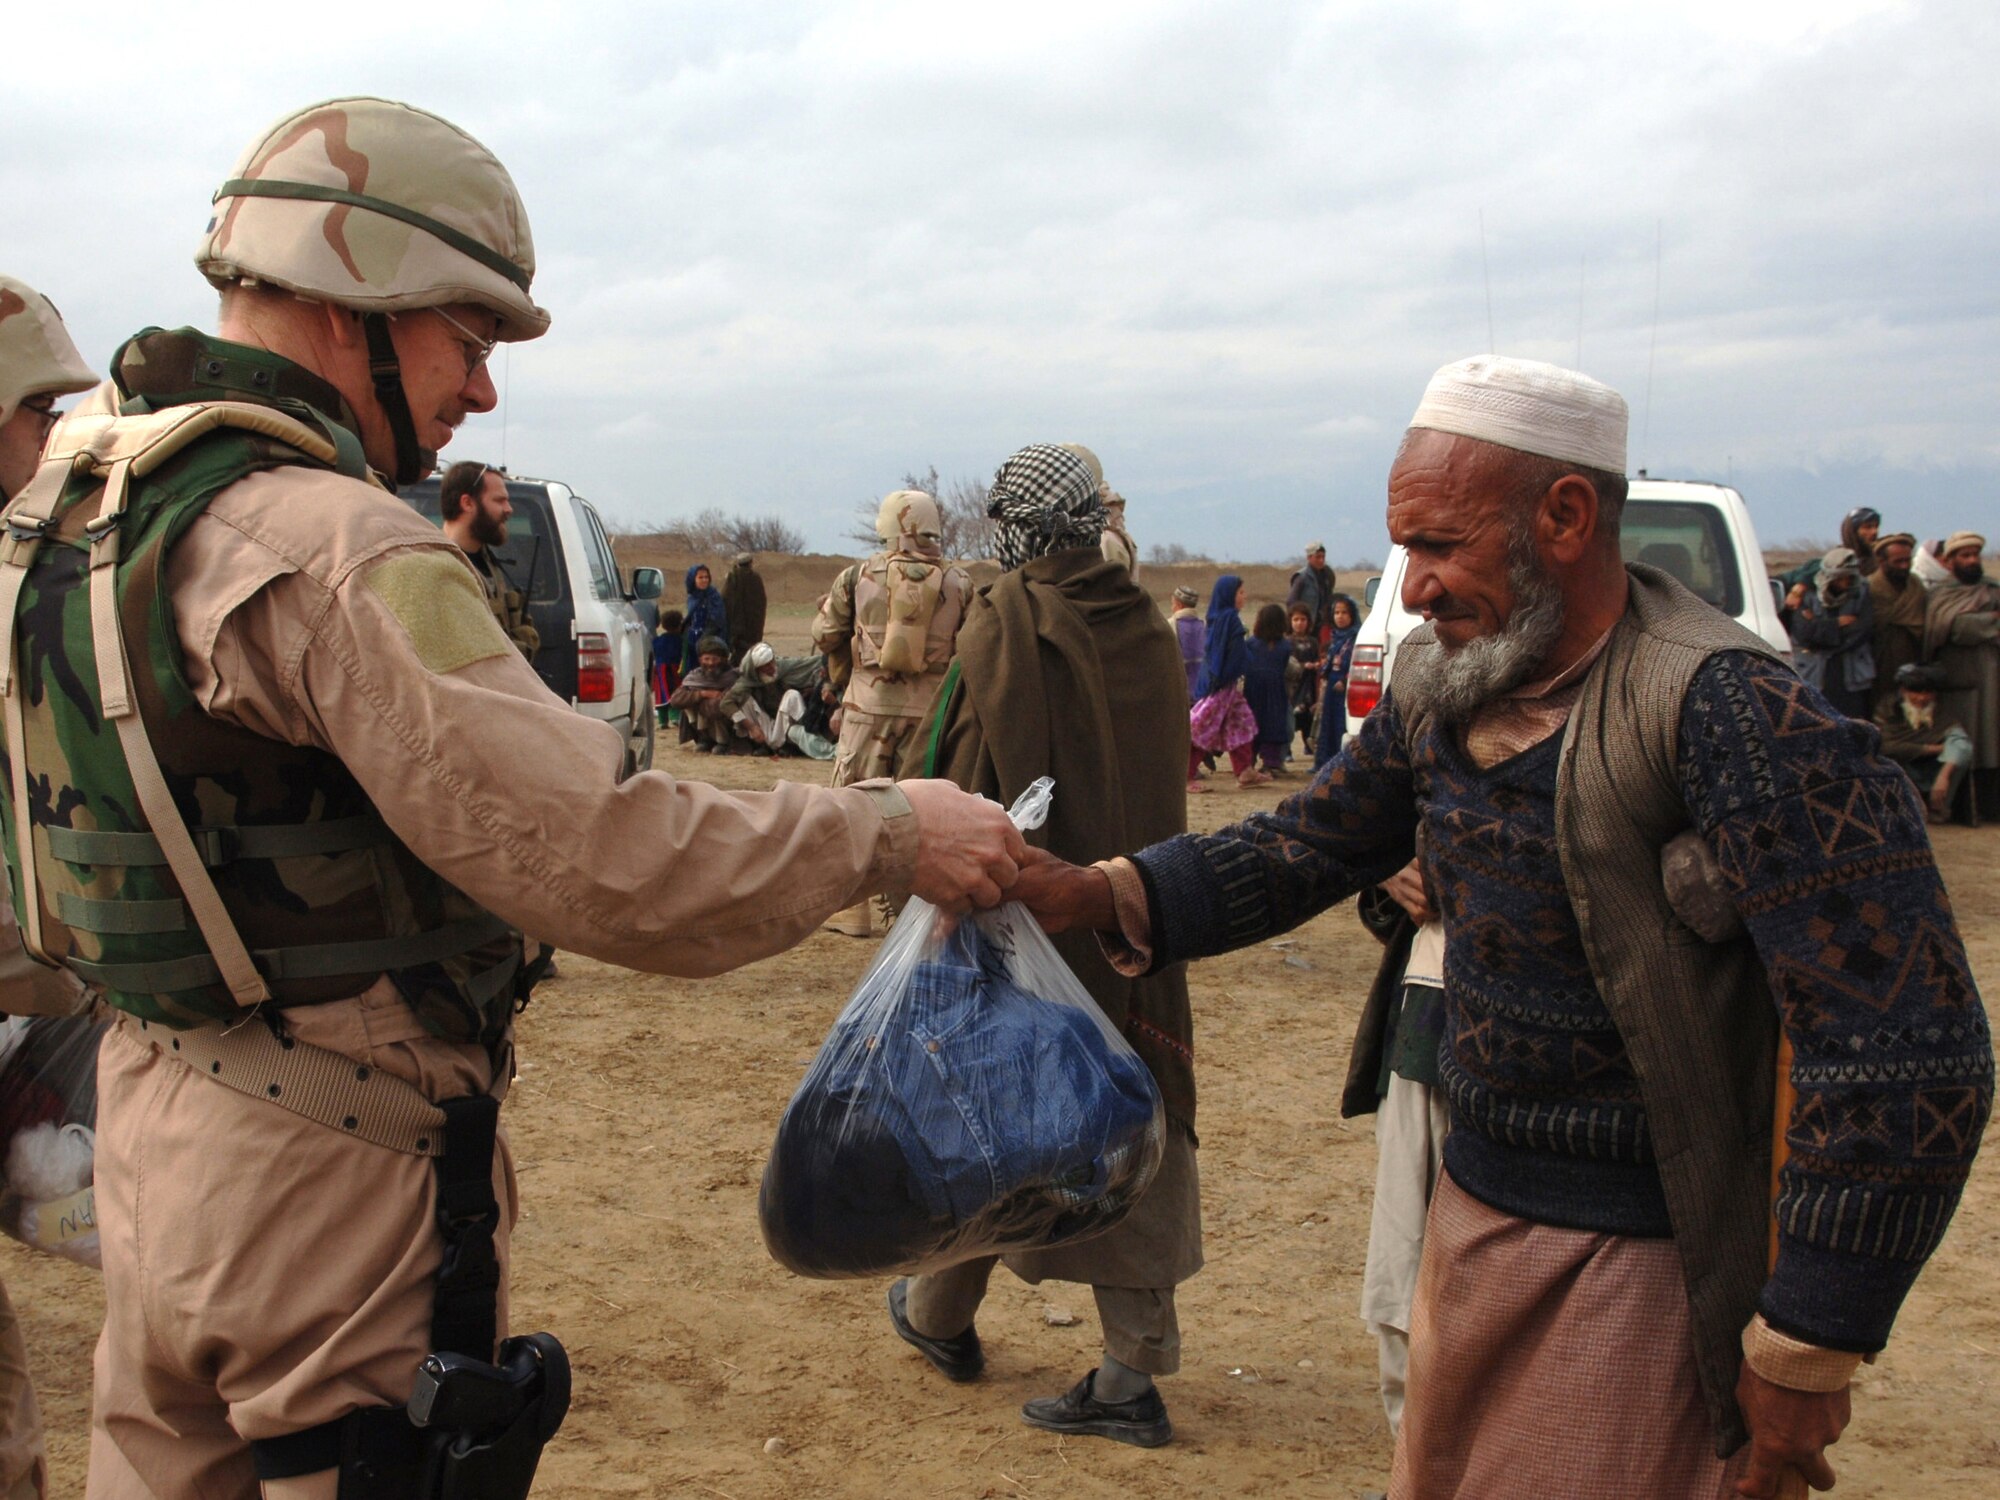 Tech. Sgt. John Strothenke hands a village elder a bag of clothing during a recent Adopt-A-Village visit to Gadia, Afghanistan. Sergeant Strothenke is an independent duty medical technician assigned to the 455th Expeditionary Fighter Squadron at Bagram Air Base, Afghanistan. He is deployed from Eielson Air Force Base, Alaska. (U.S. Air Force photo/Staff Sgt. Jennifer Redente) 